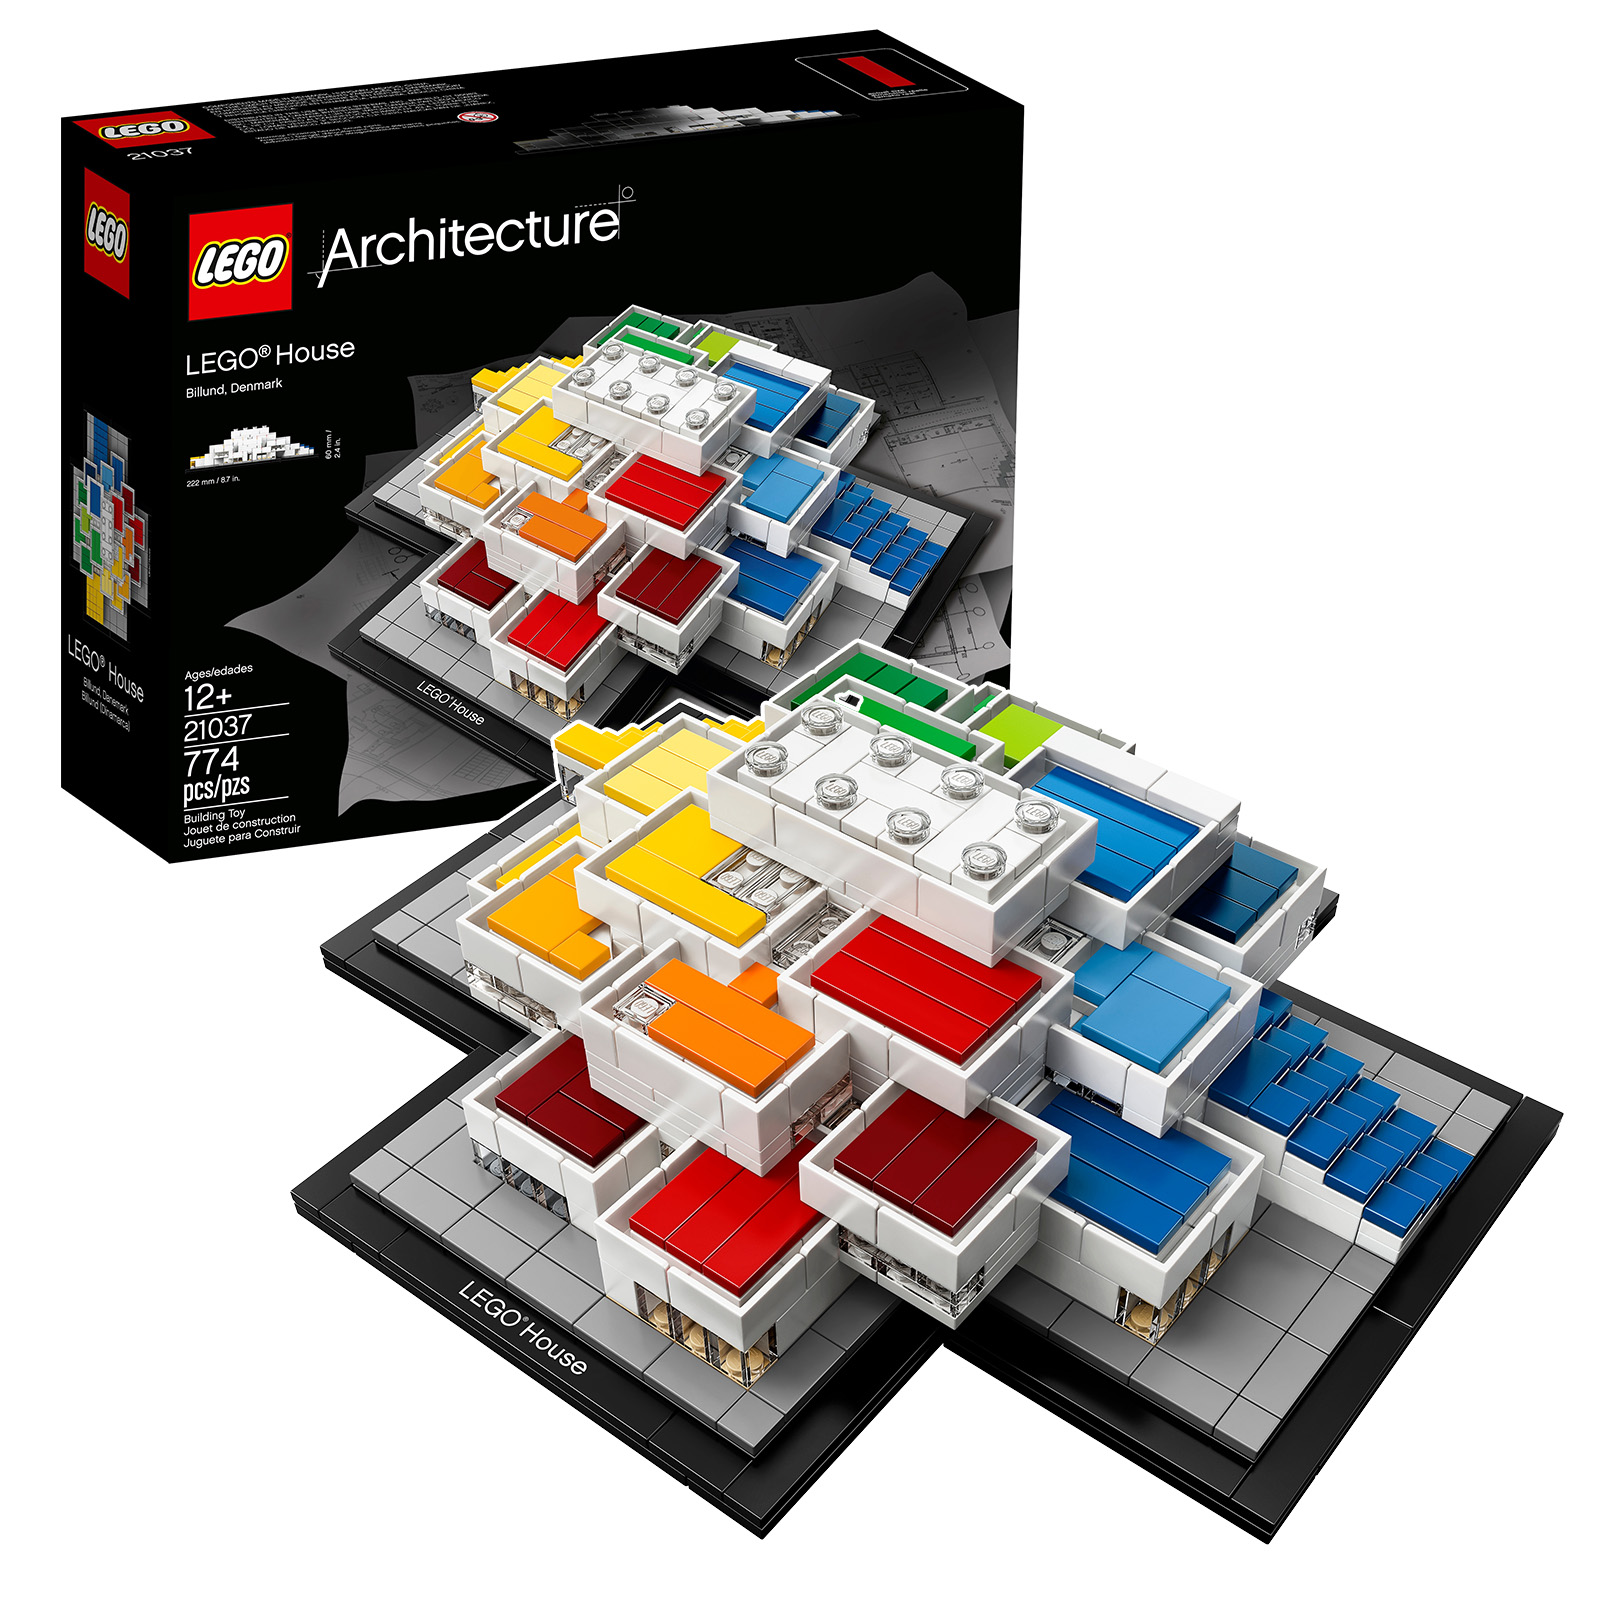 ▻ LEGO Architecture 21037 LEGO House: again available in the LEGO Shop -  HOTH BRICKS